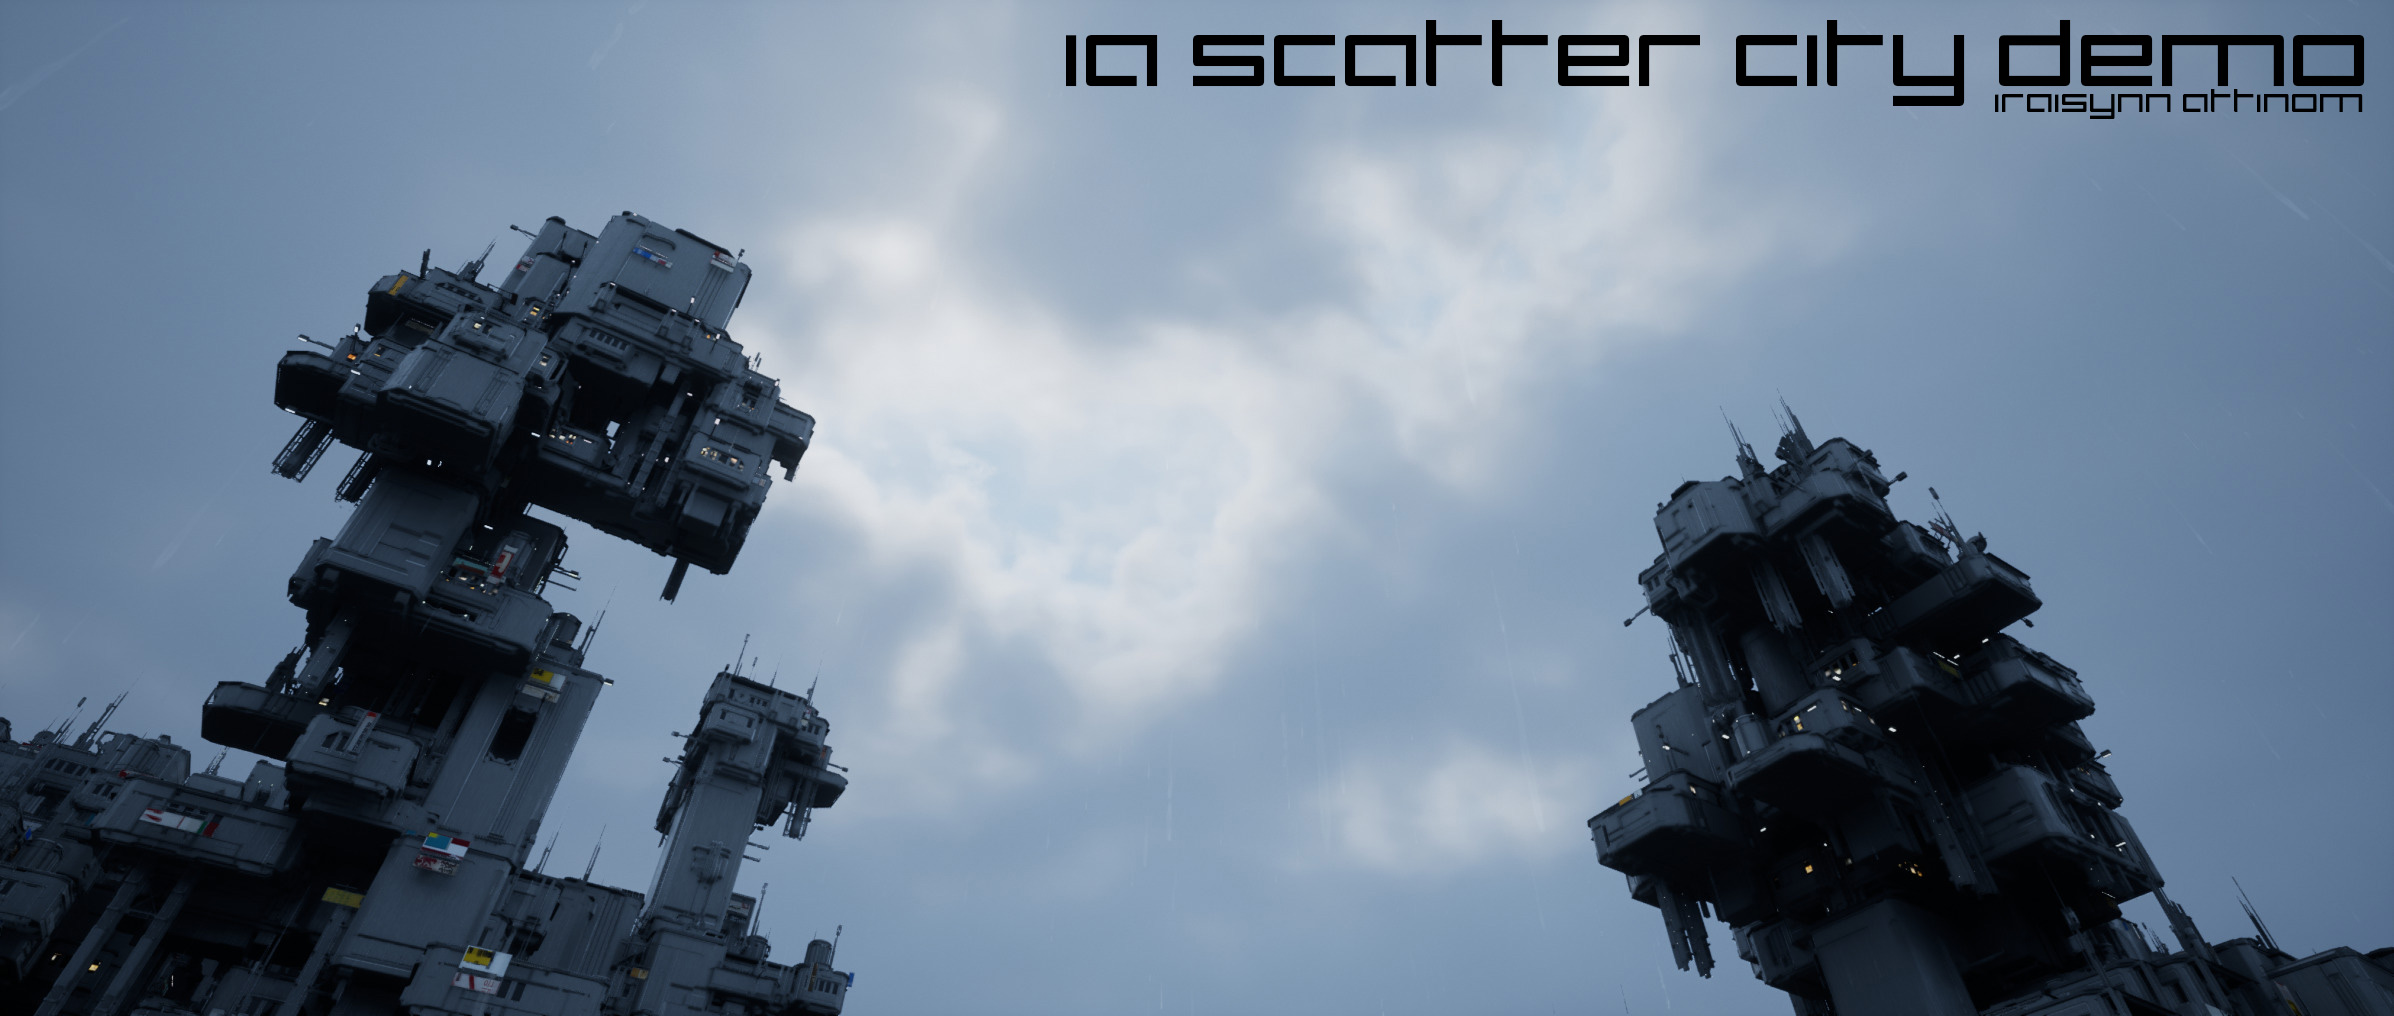 ia scatter city demo